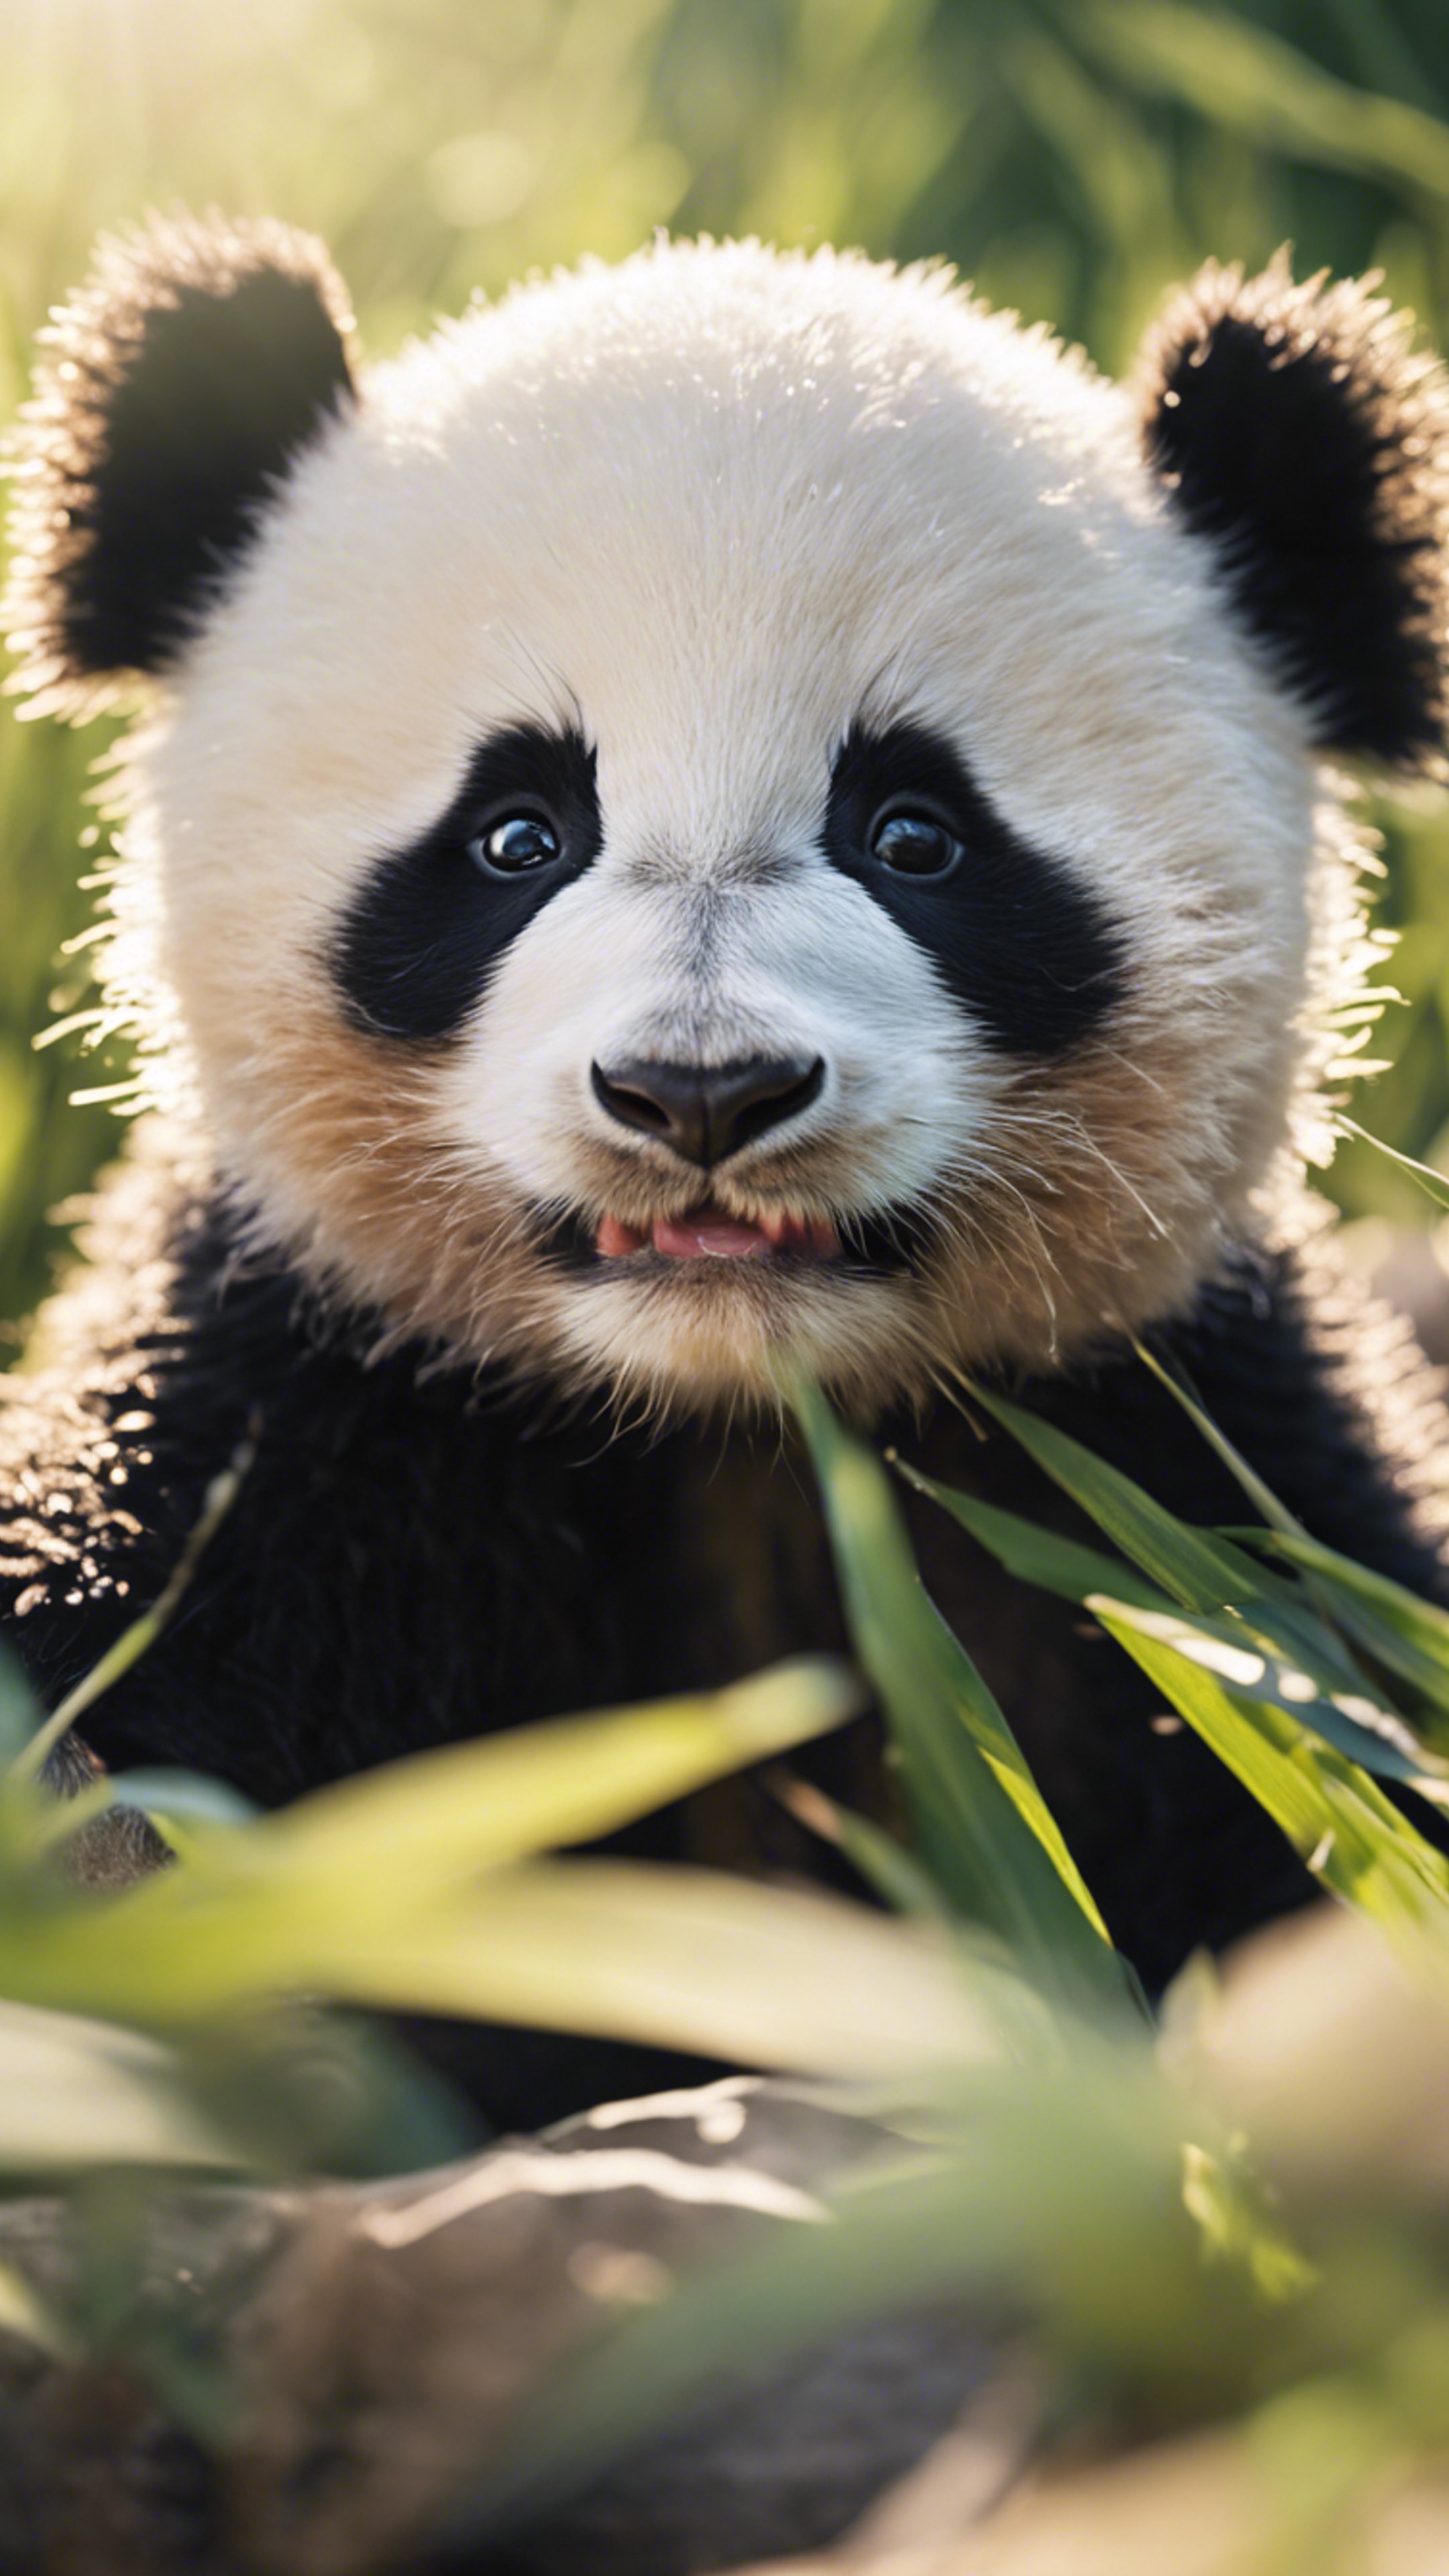 A cheeky panda cub pulling a funny face, under the warm and inviting summer sun. Wallpaper[260c49d866ff4dc685e3]